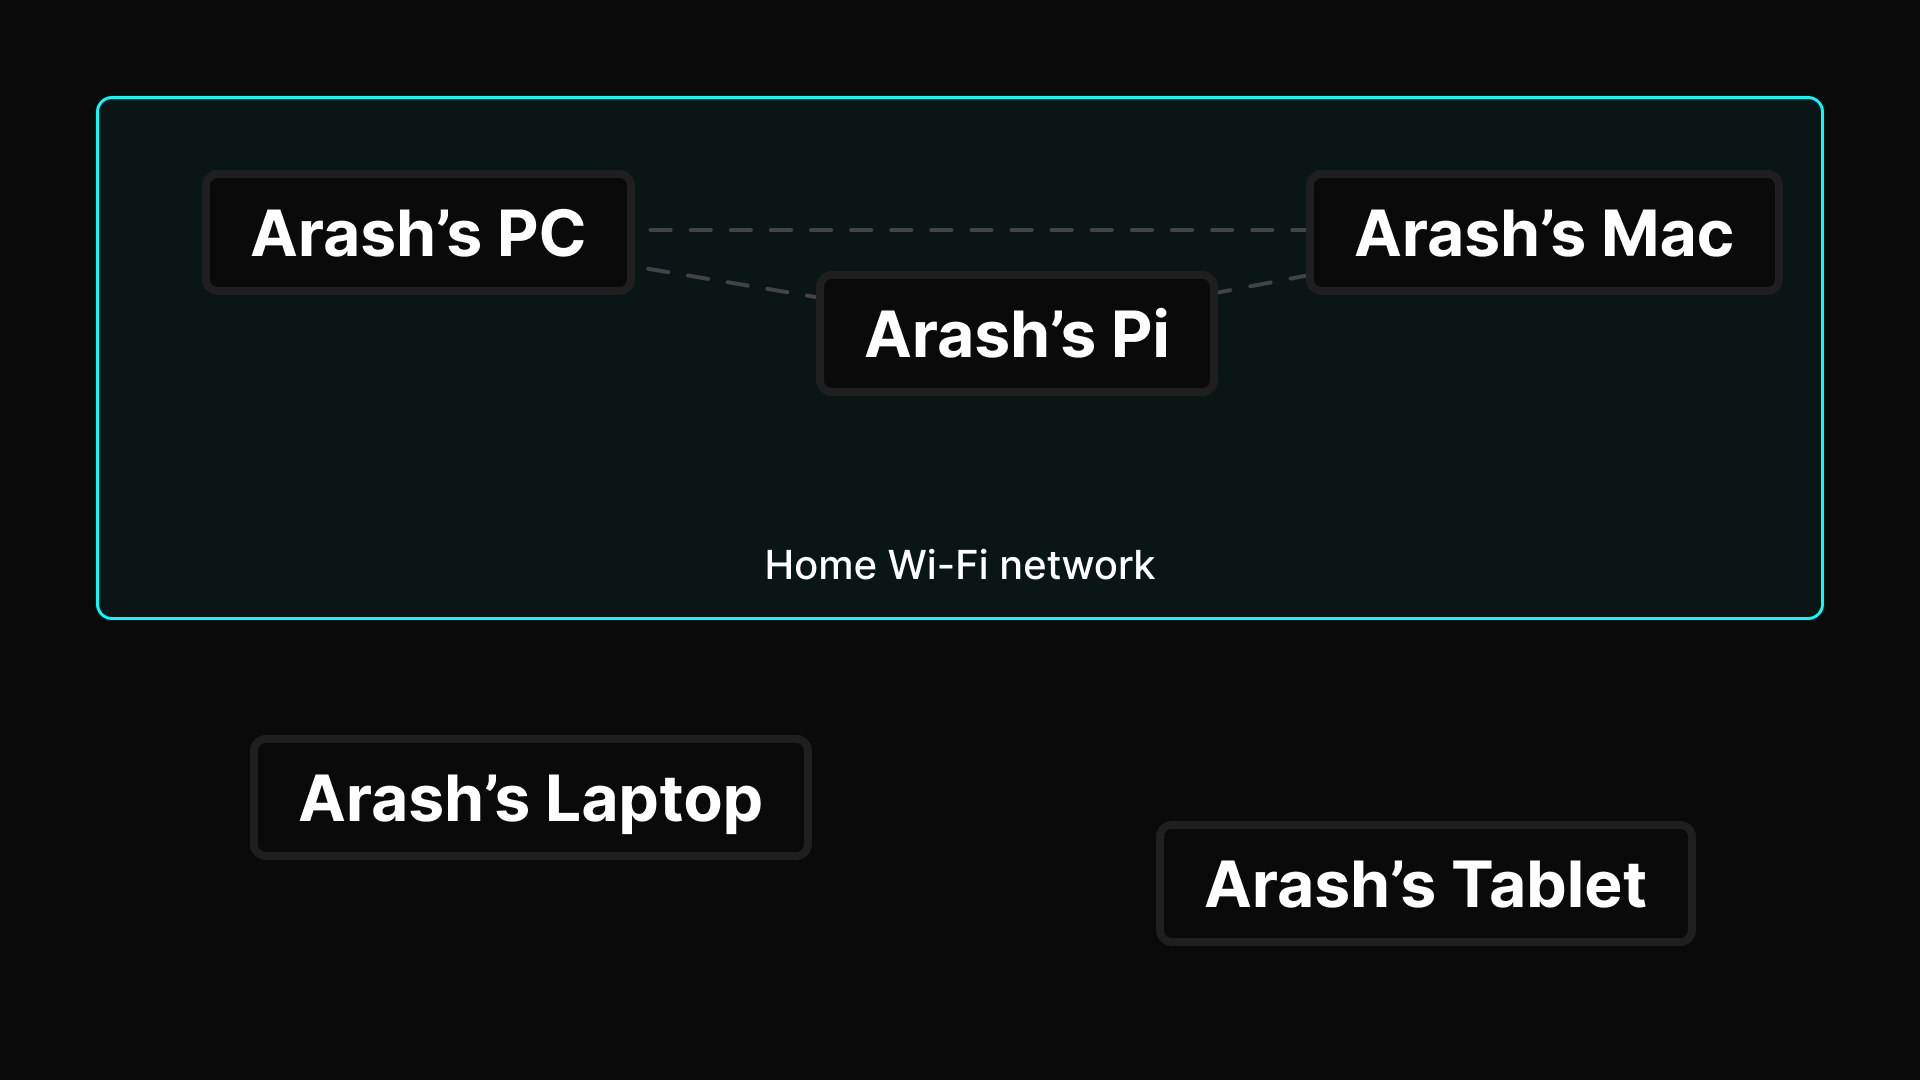 A graph-like network depicting three devices, Arash's PC, Arash's Mac, and Arash's Pi enveloped in a rectangle with the label 'Home Wi-Fi network' with lines interconnecting the devices. Outside of the rectangle are two devices, Arash's Laptop and Arash's Tablet.